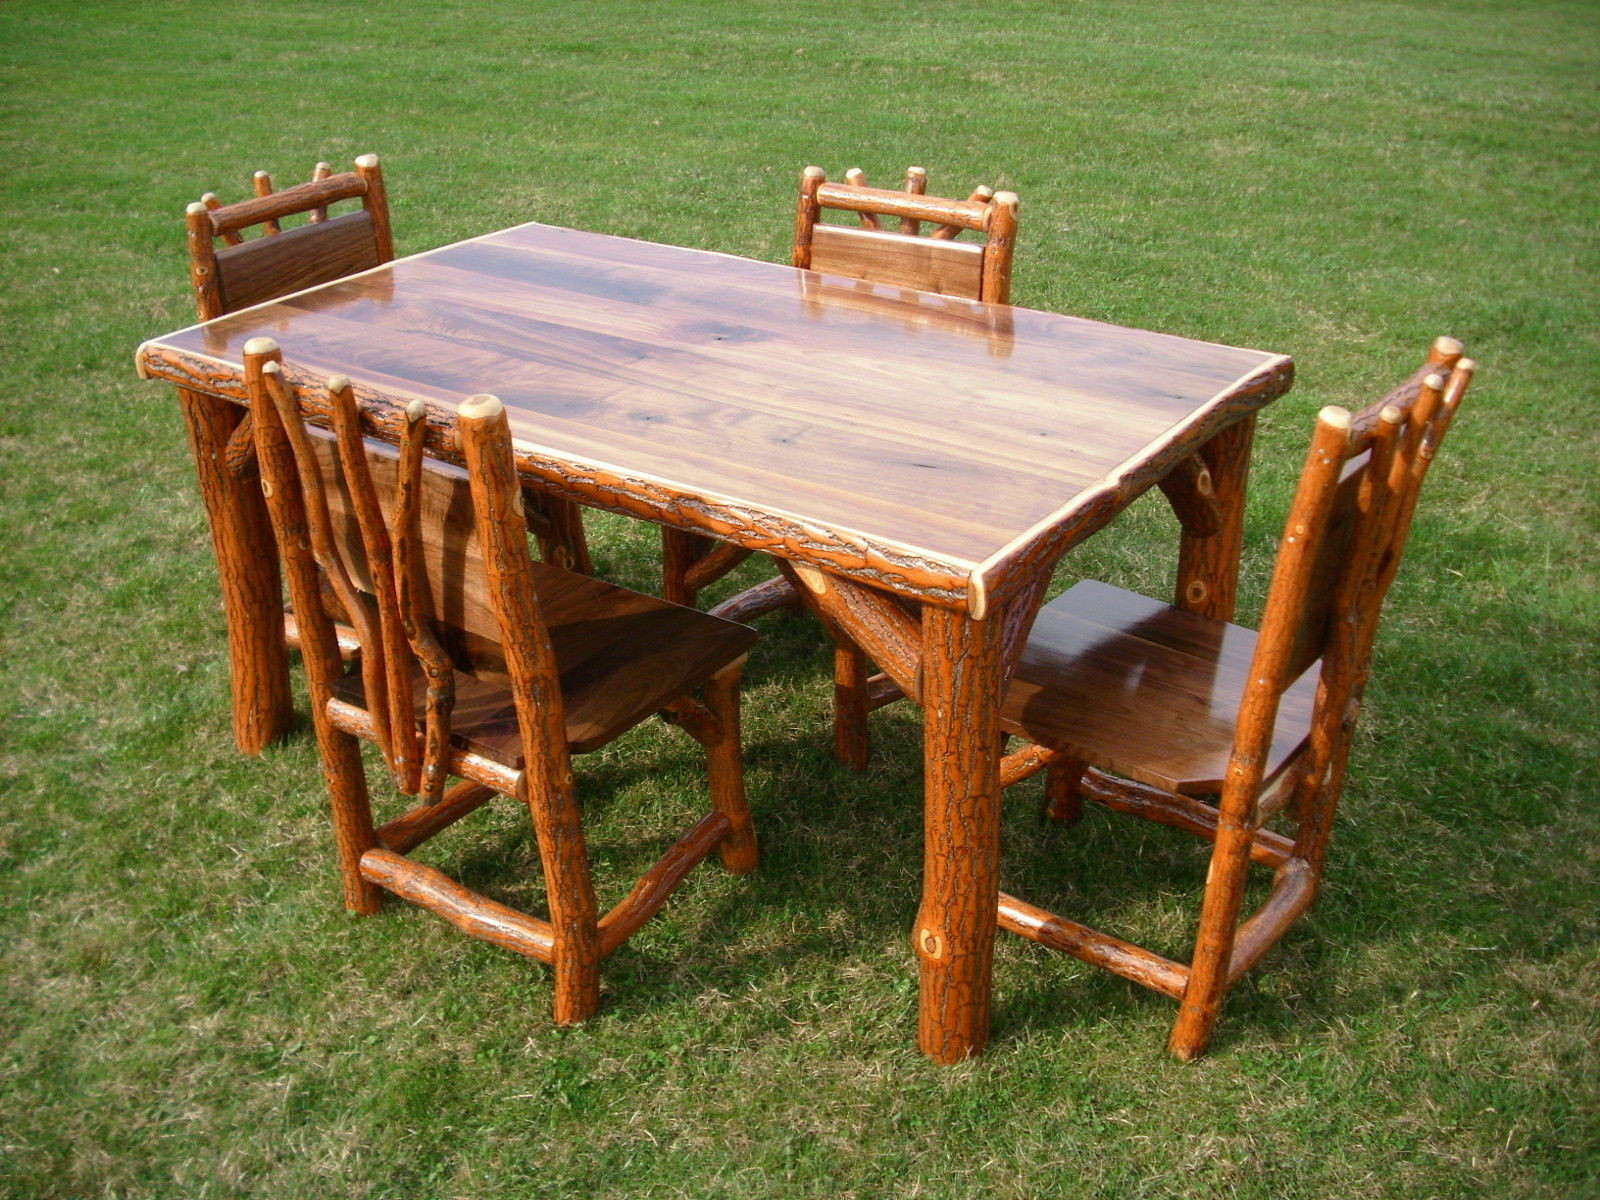 Rustic Kitchen Tables
 How to Build a Rustic Kitchen Table